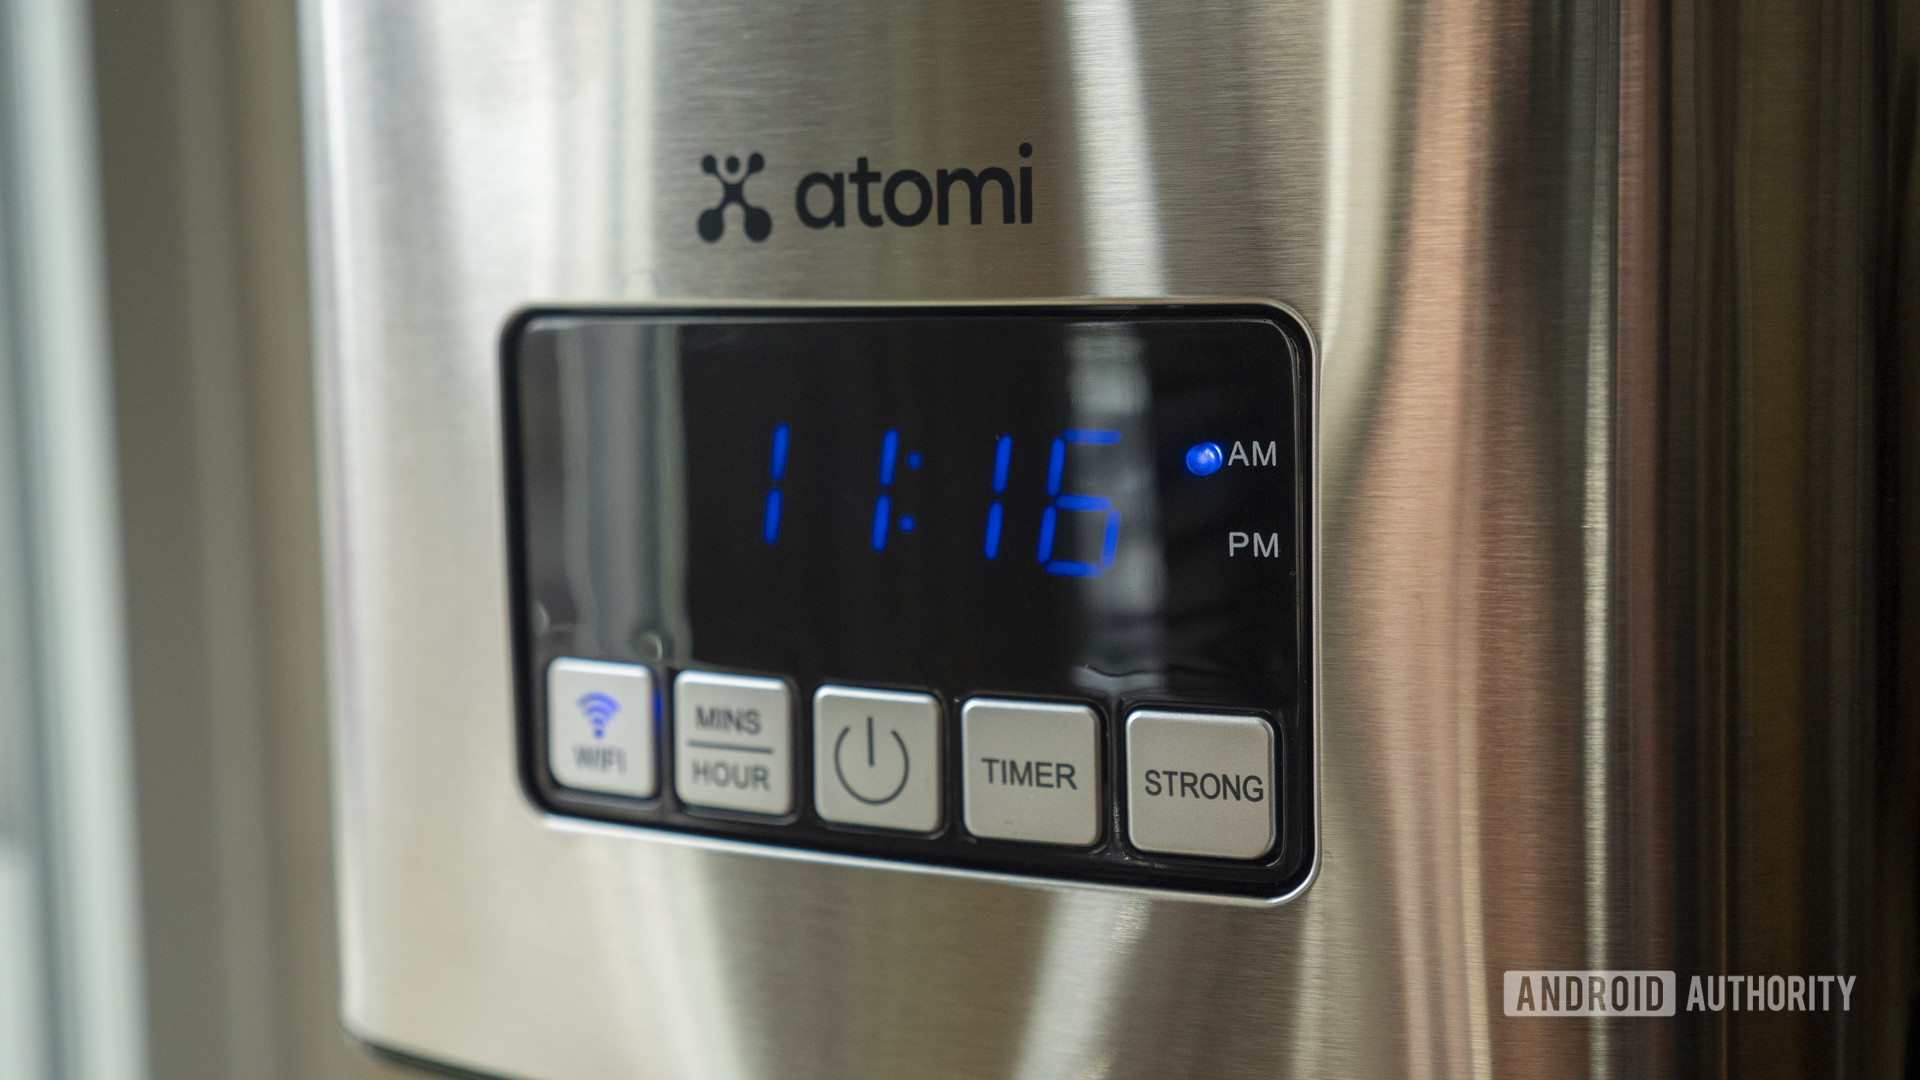 atomi smart coffee maker review buttons display time